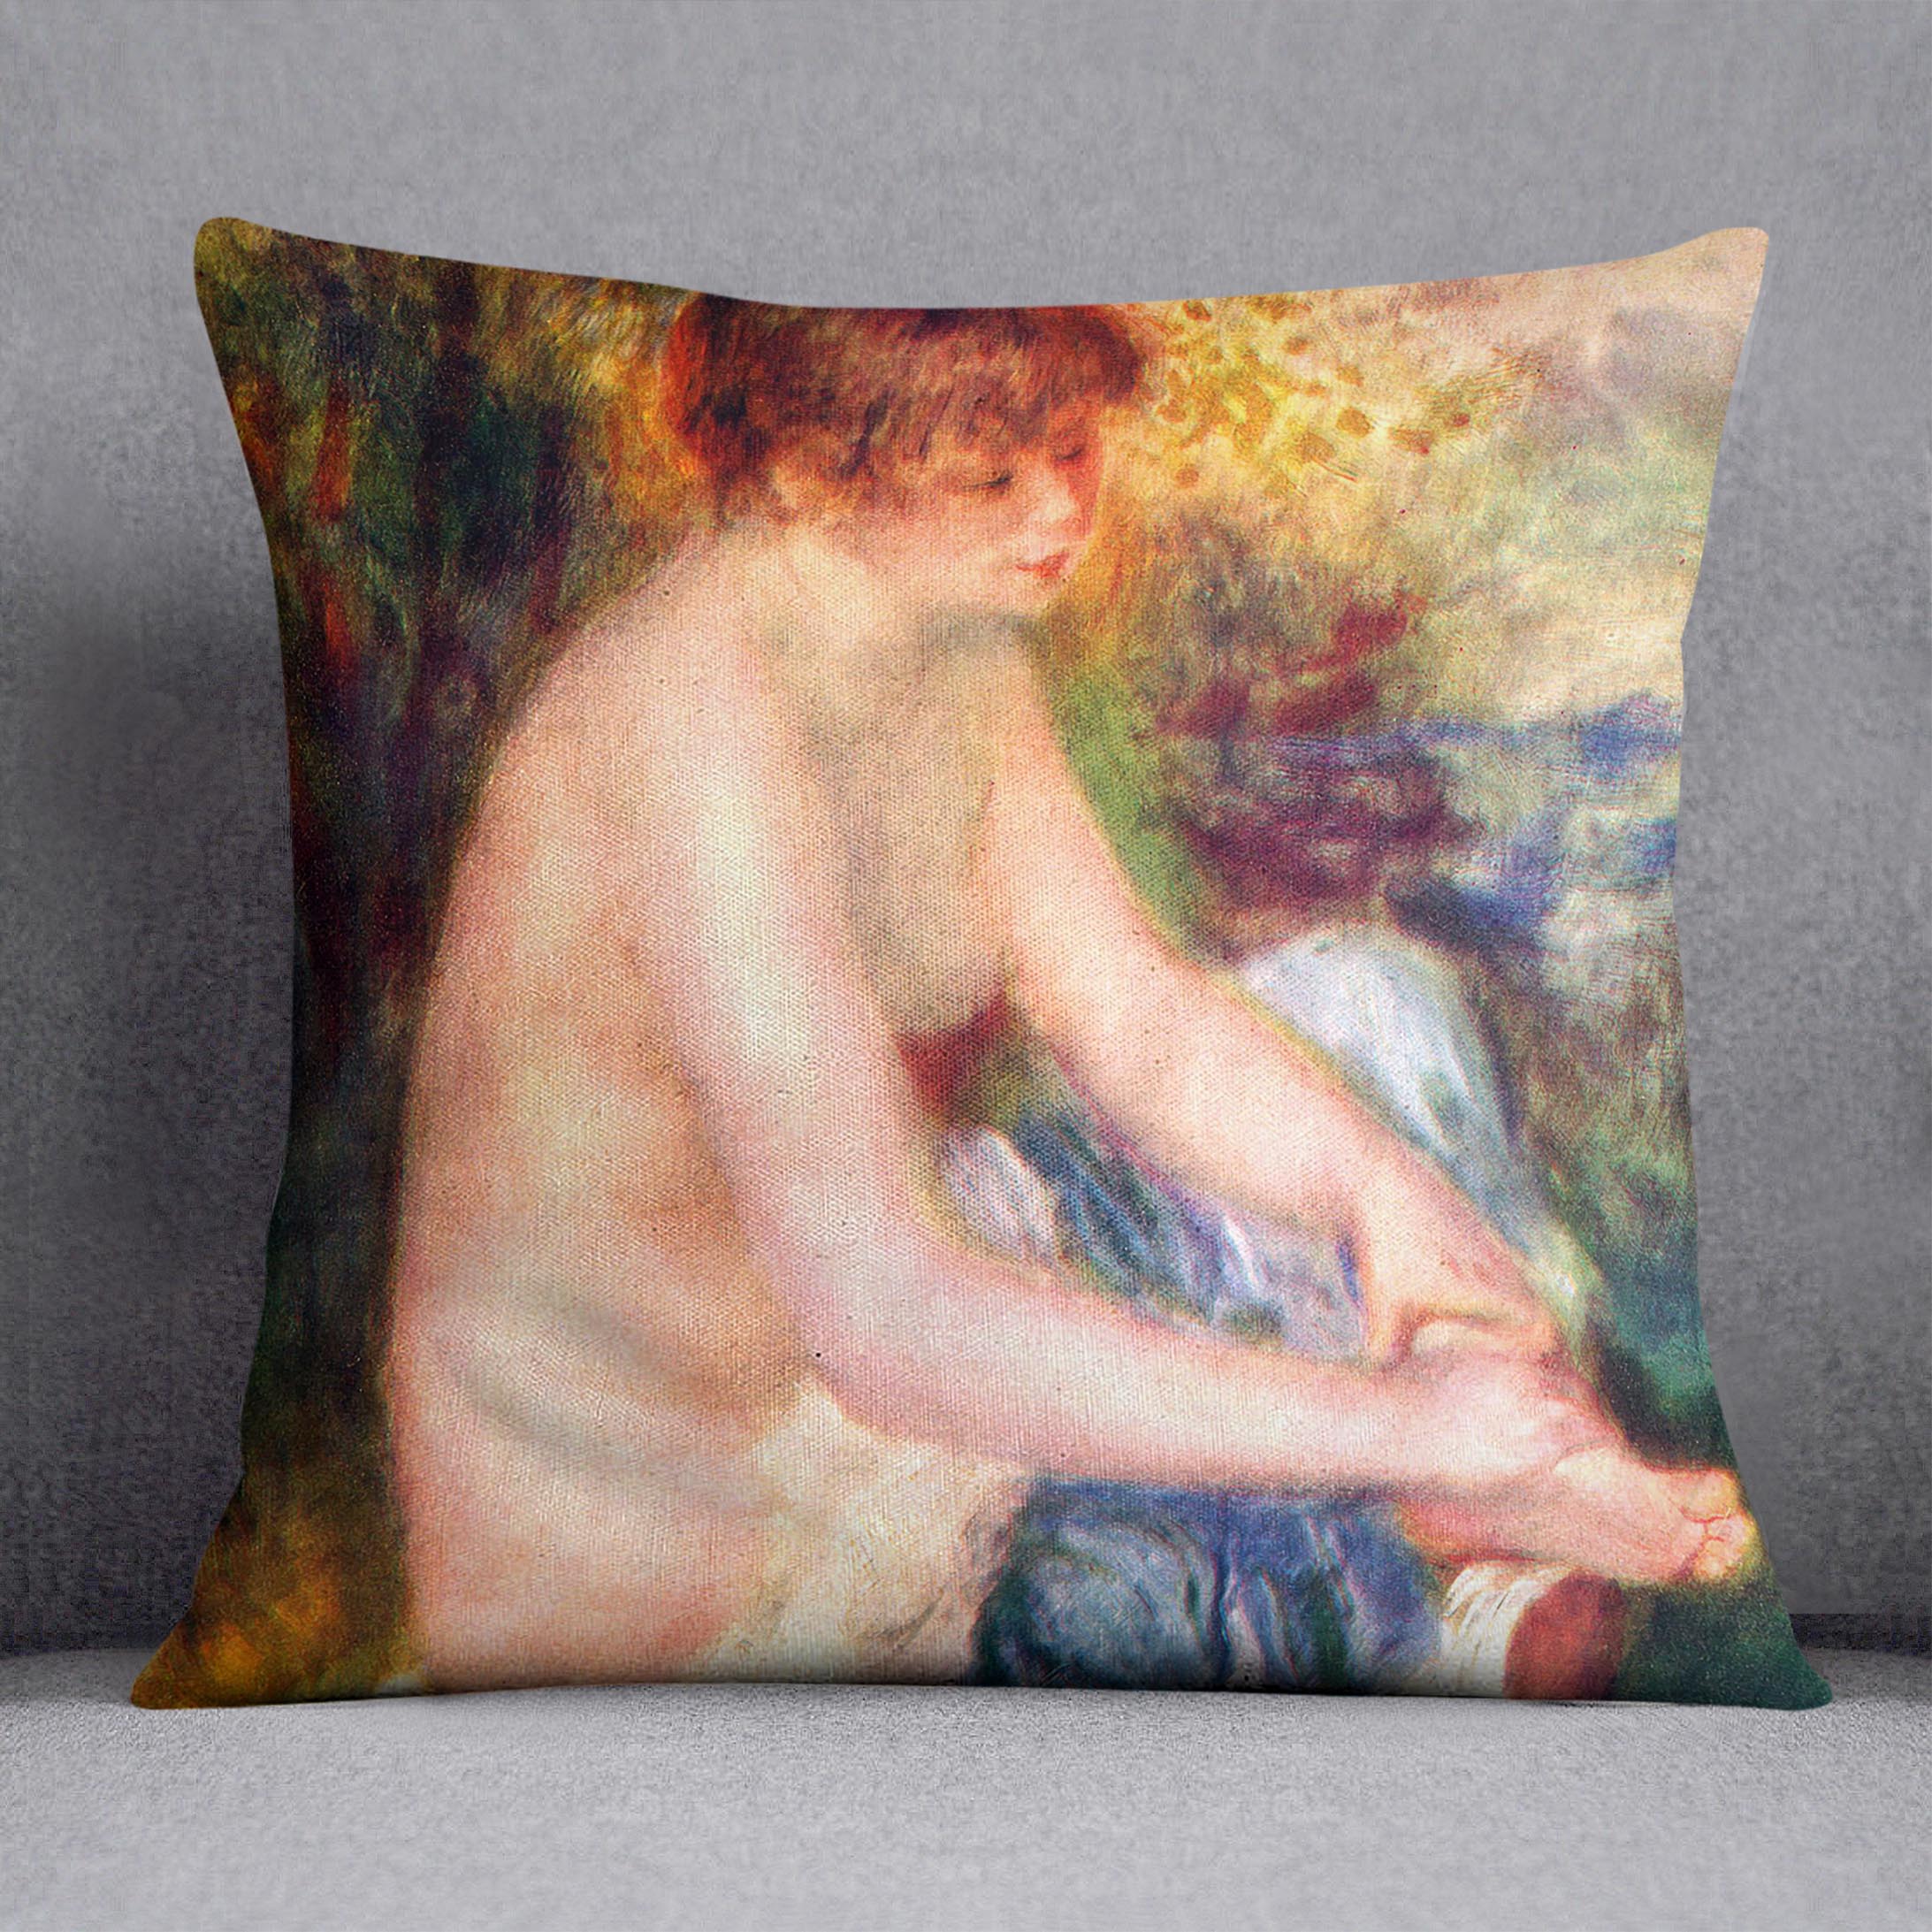 Nude in blue by Renoir Cushion